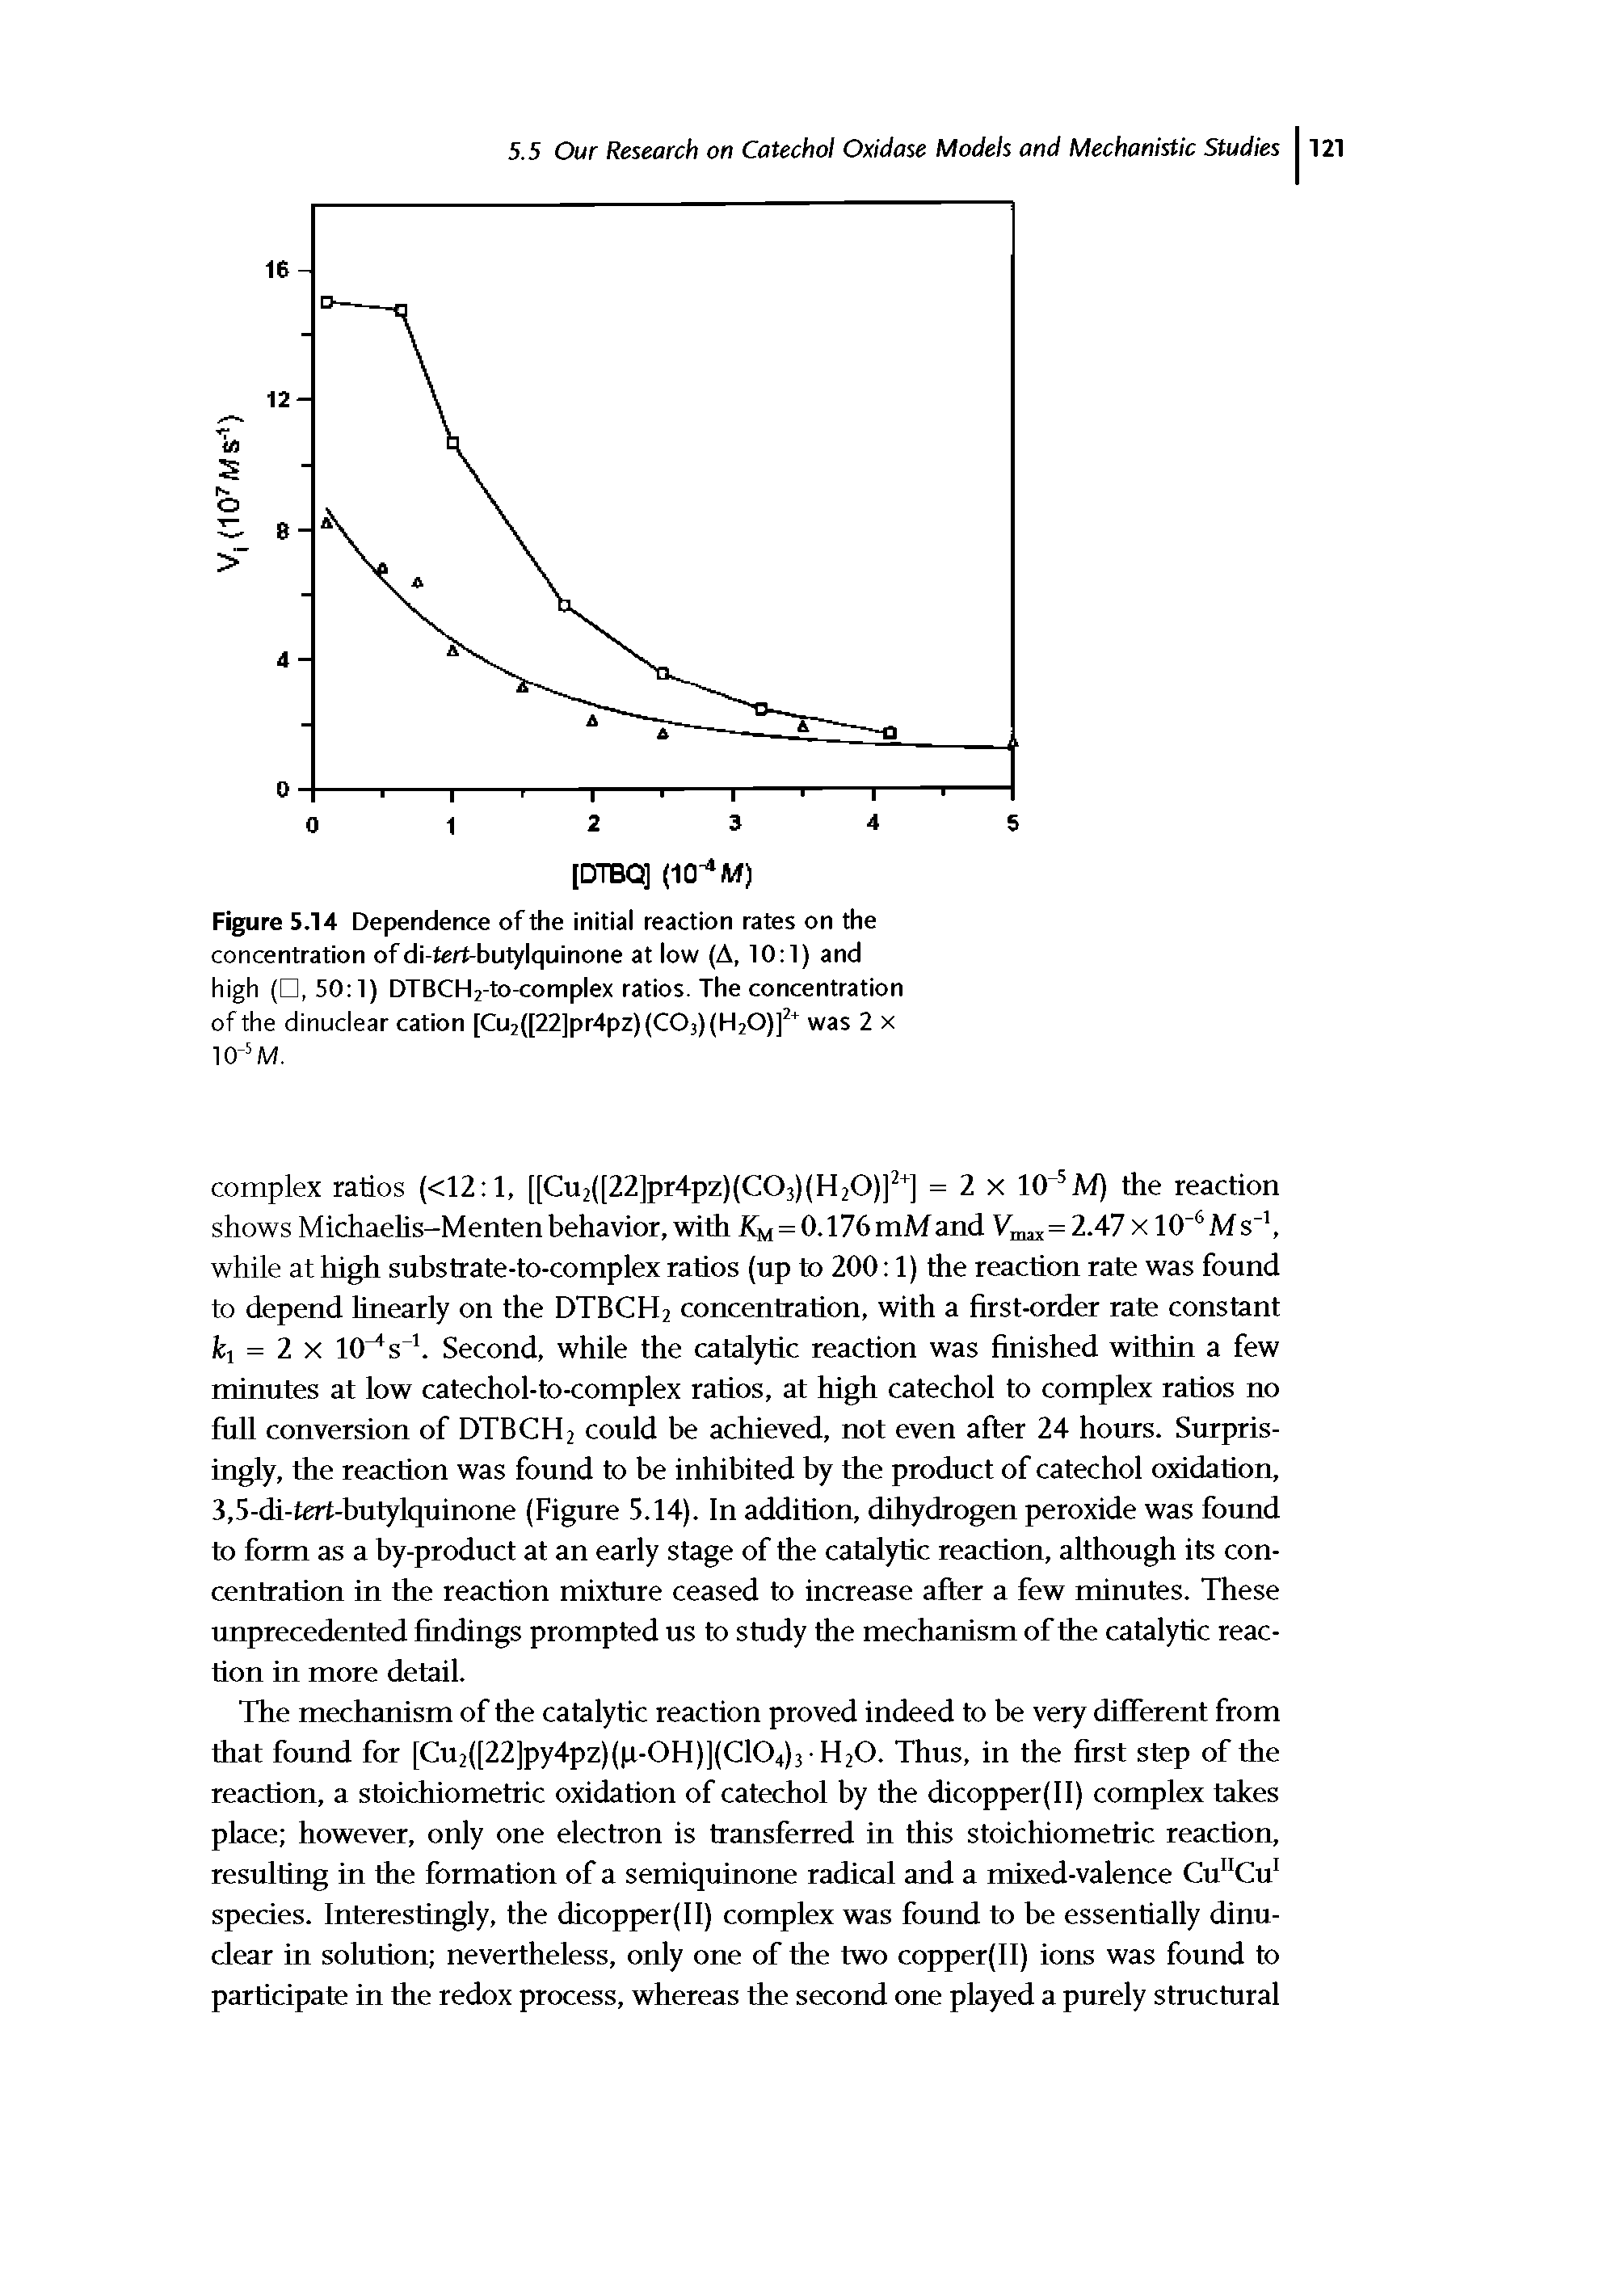 Figure 5.14 Dependence of the initial reaction rates on the concentration of di-tert-butylquinone at low (A, 10 1) and high ( , 50 1) DTBCH2-to-complex ratios. The concentration of the dinuclear cation [Cu2([22]pr4pz)(C03)(H20)]2+ was 2 x...